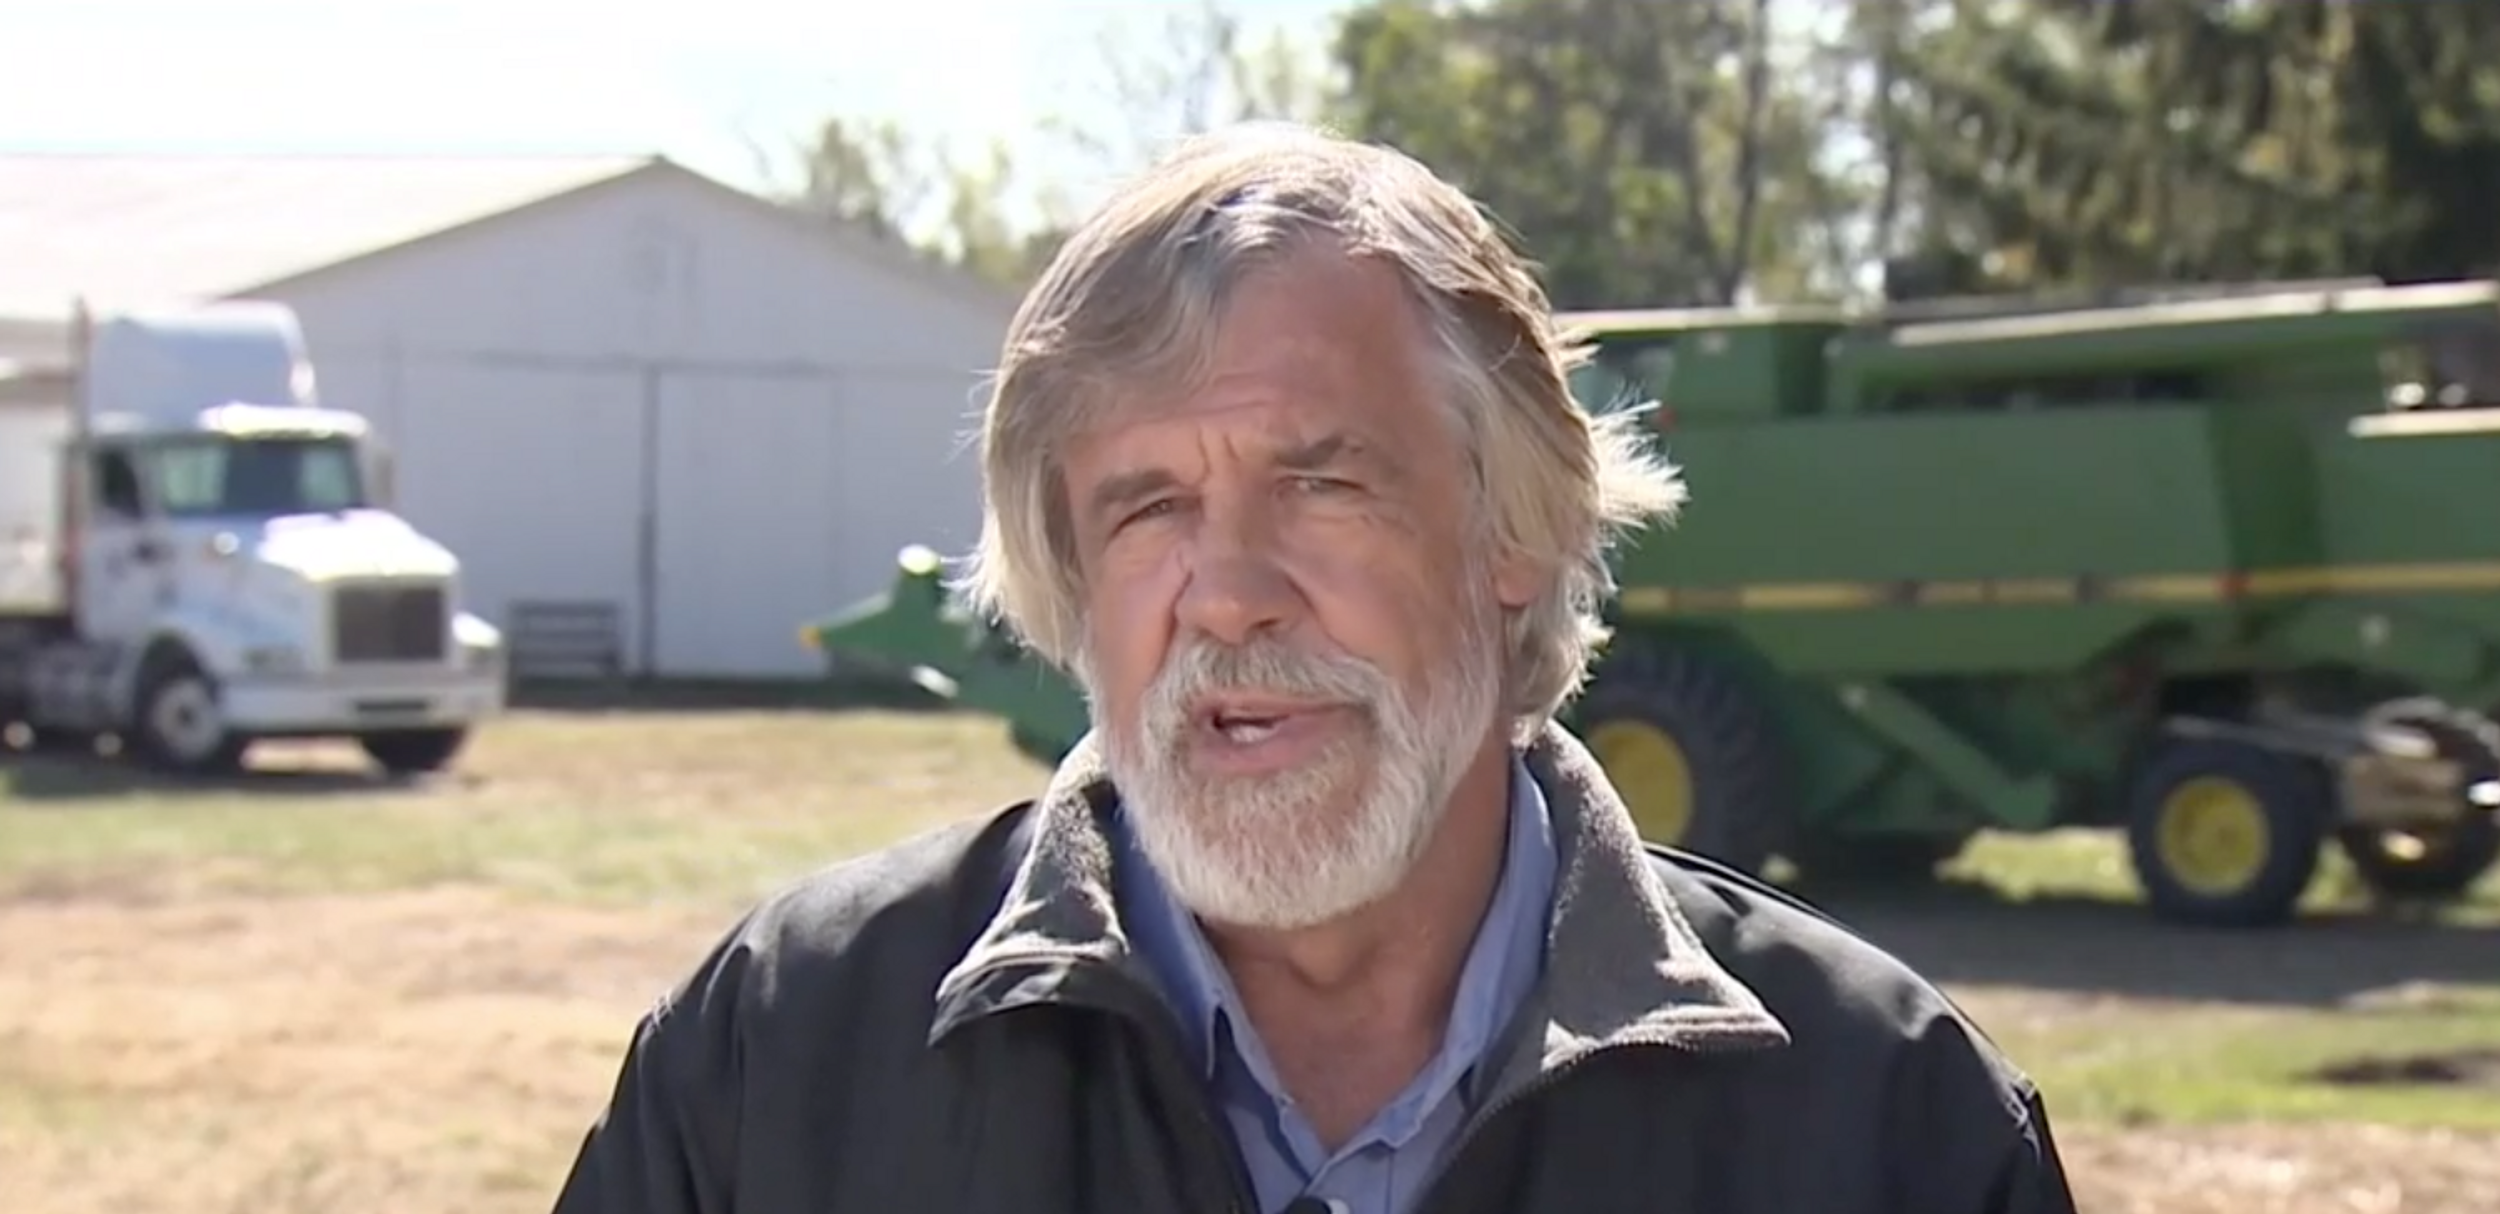 Former Pro-Trump Ohio Farmer Says Trump Could Walk Across Water And He Still Wouldn't Vote For Him In 2020